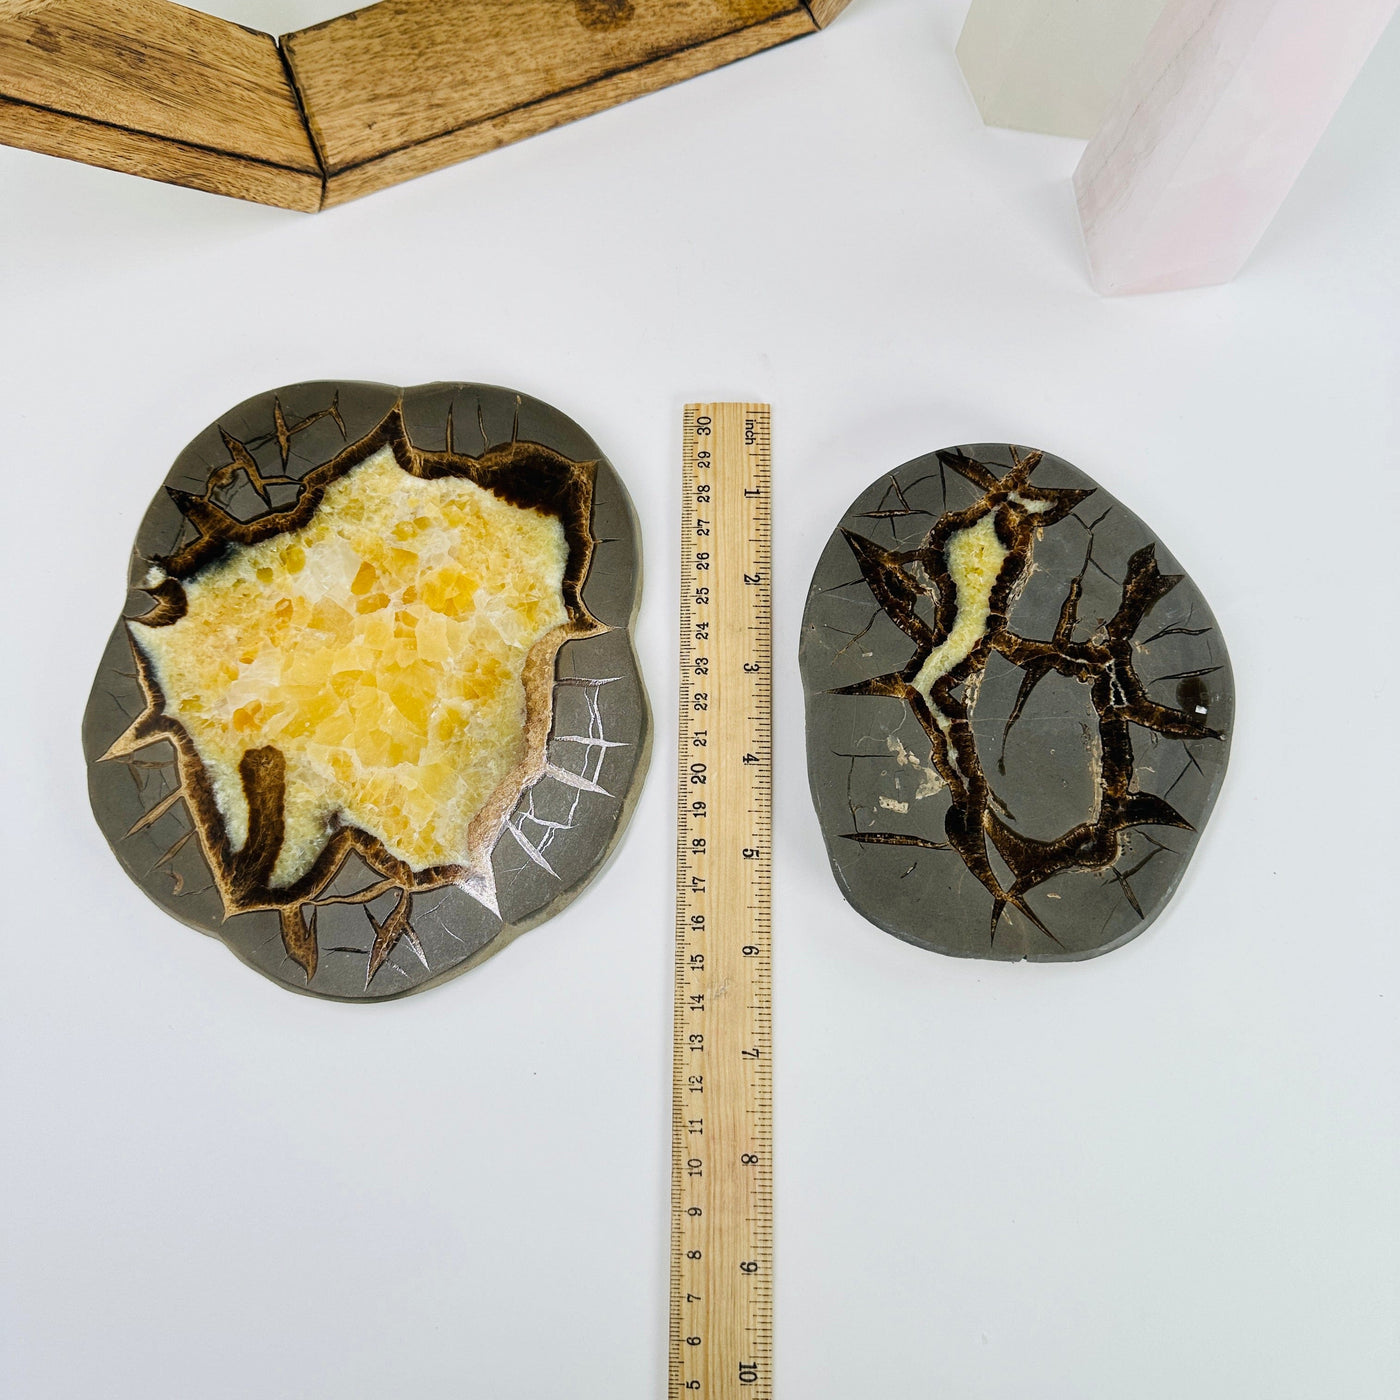 Septarian platter next to a ruler for size reference